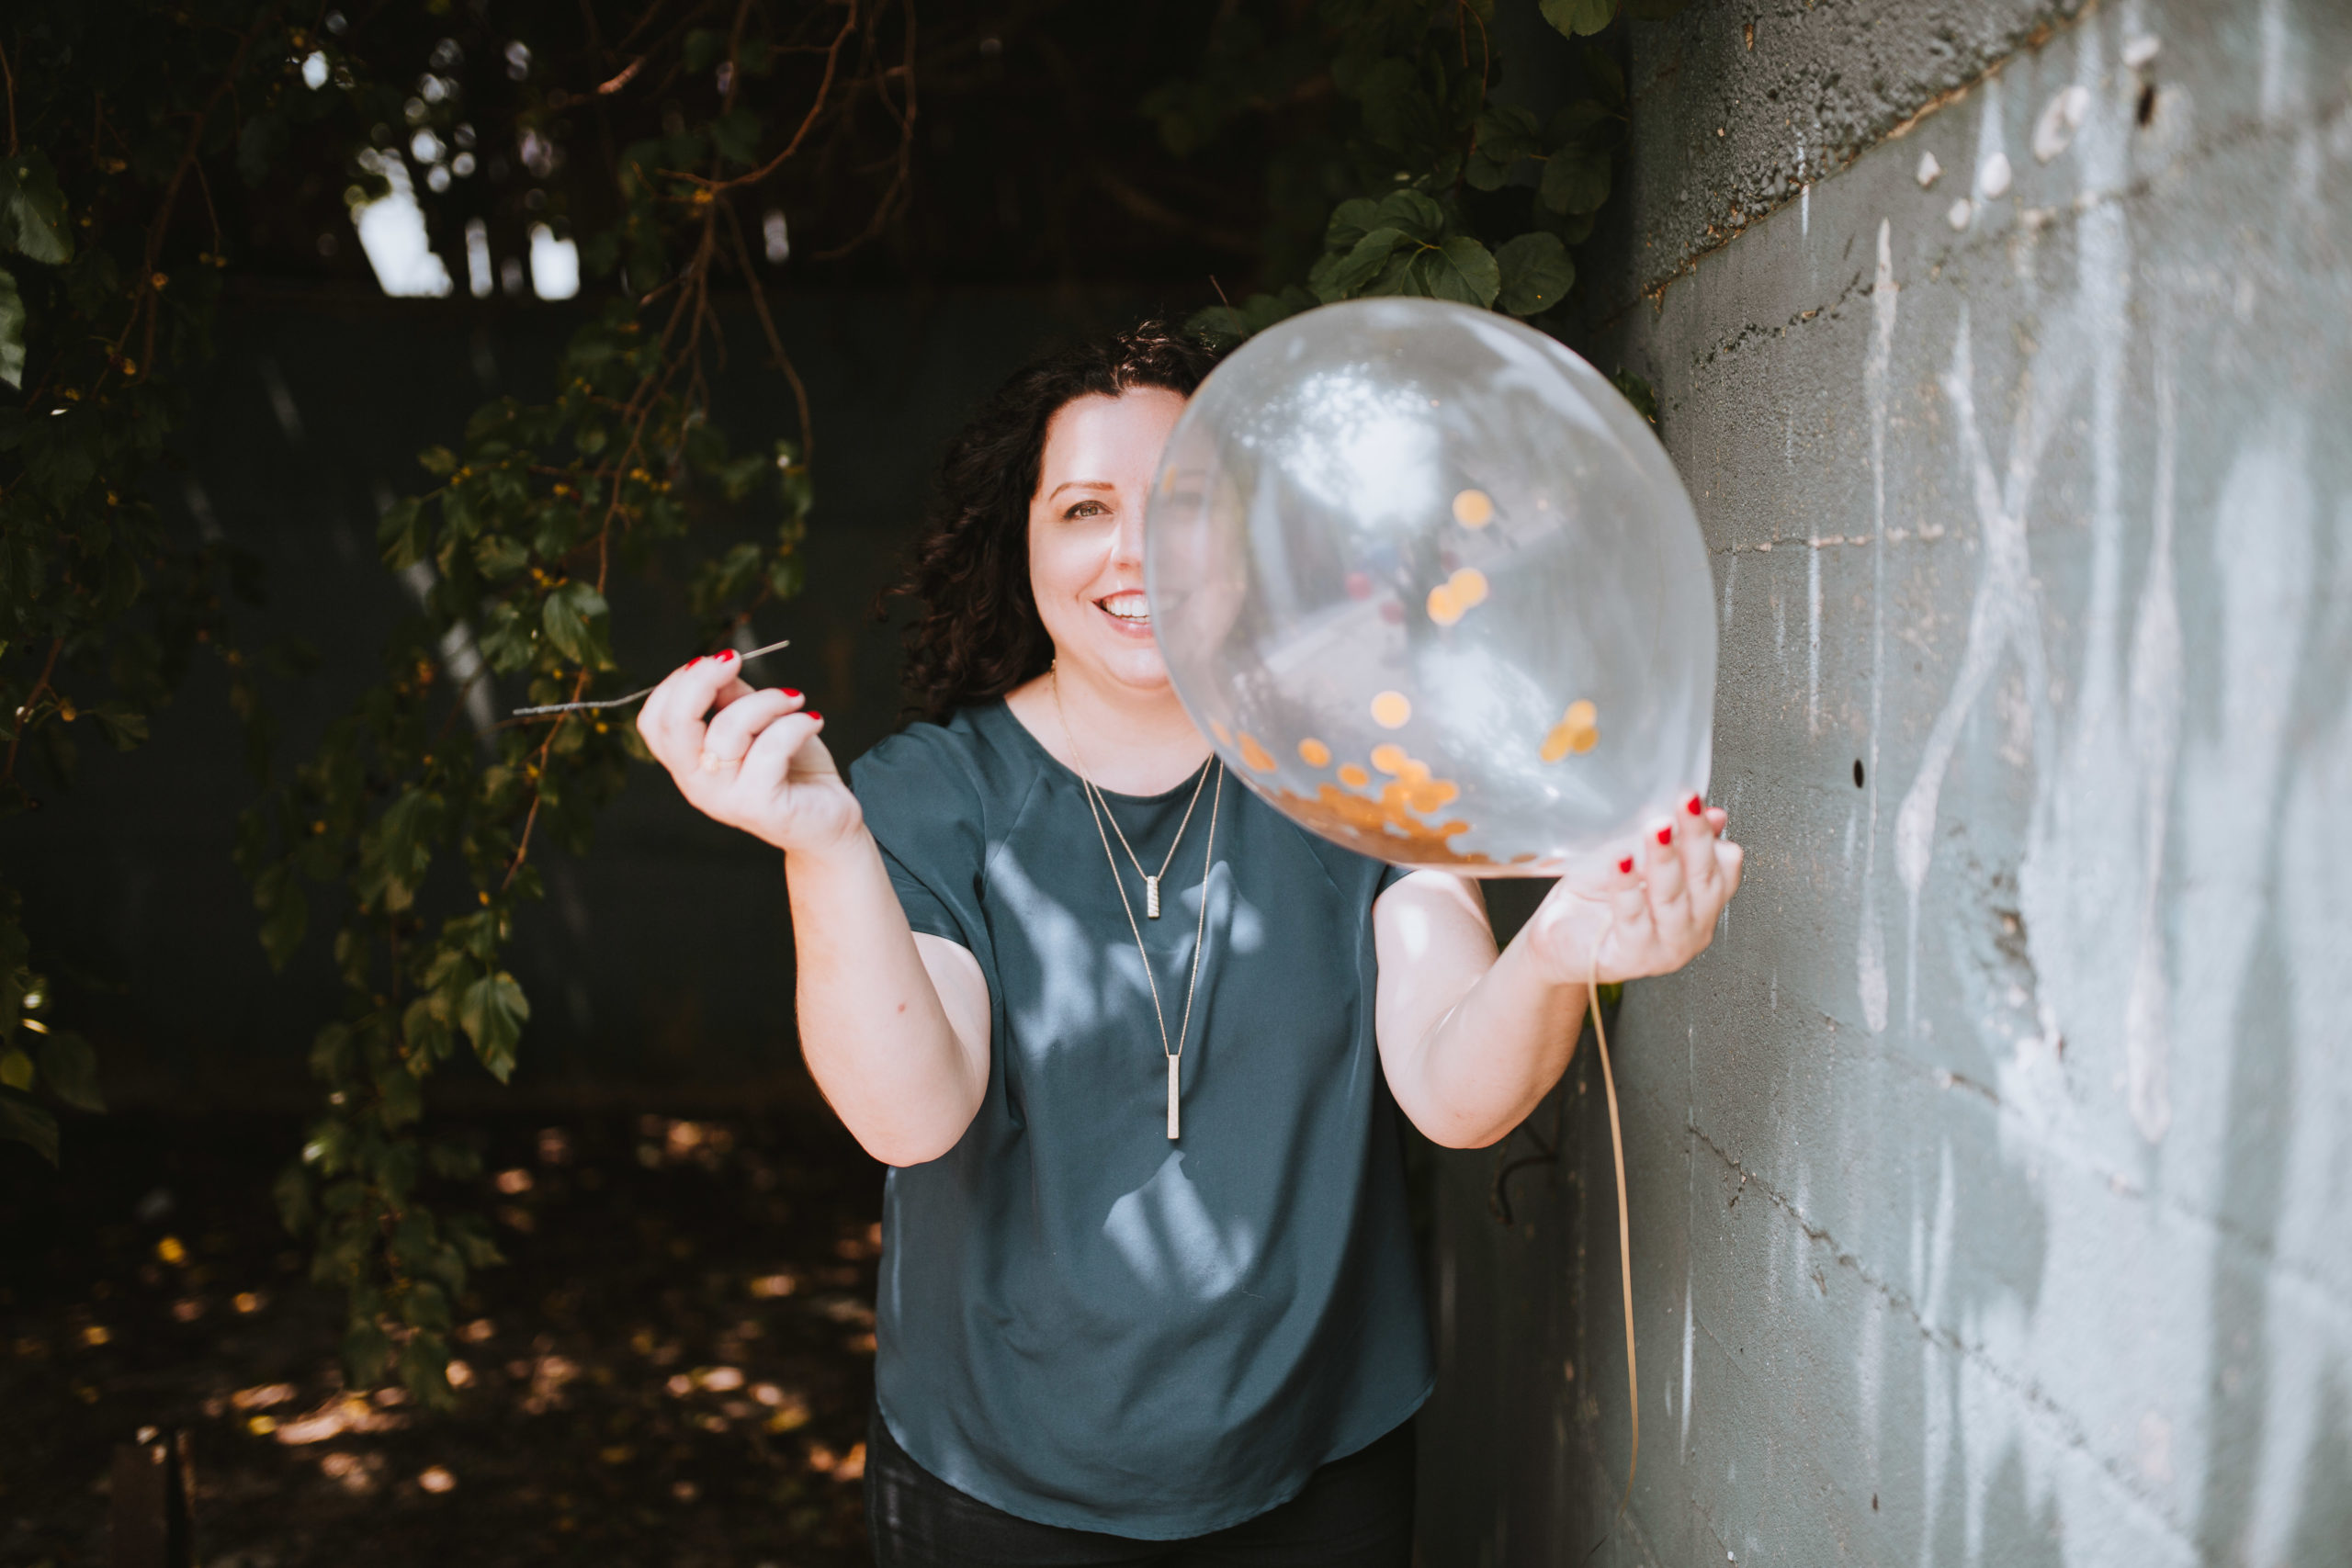 Candace D'Agnolo standing next to a brick wall in an overgrown area holding a balloon in one hand and a needle in the other